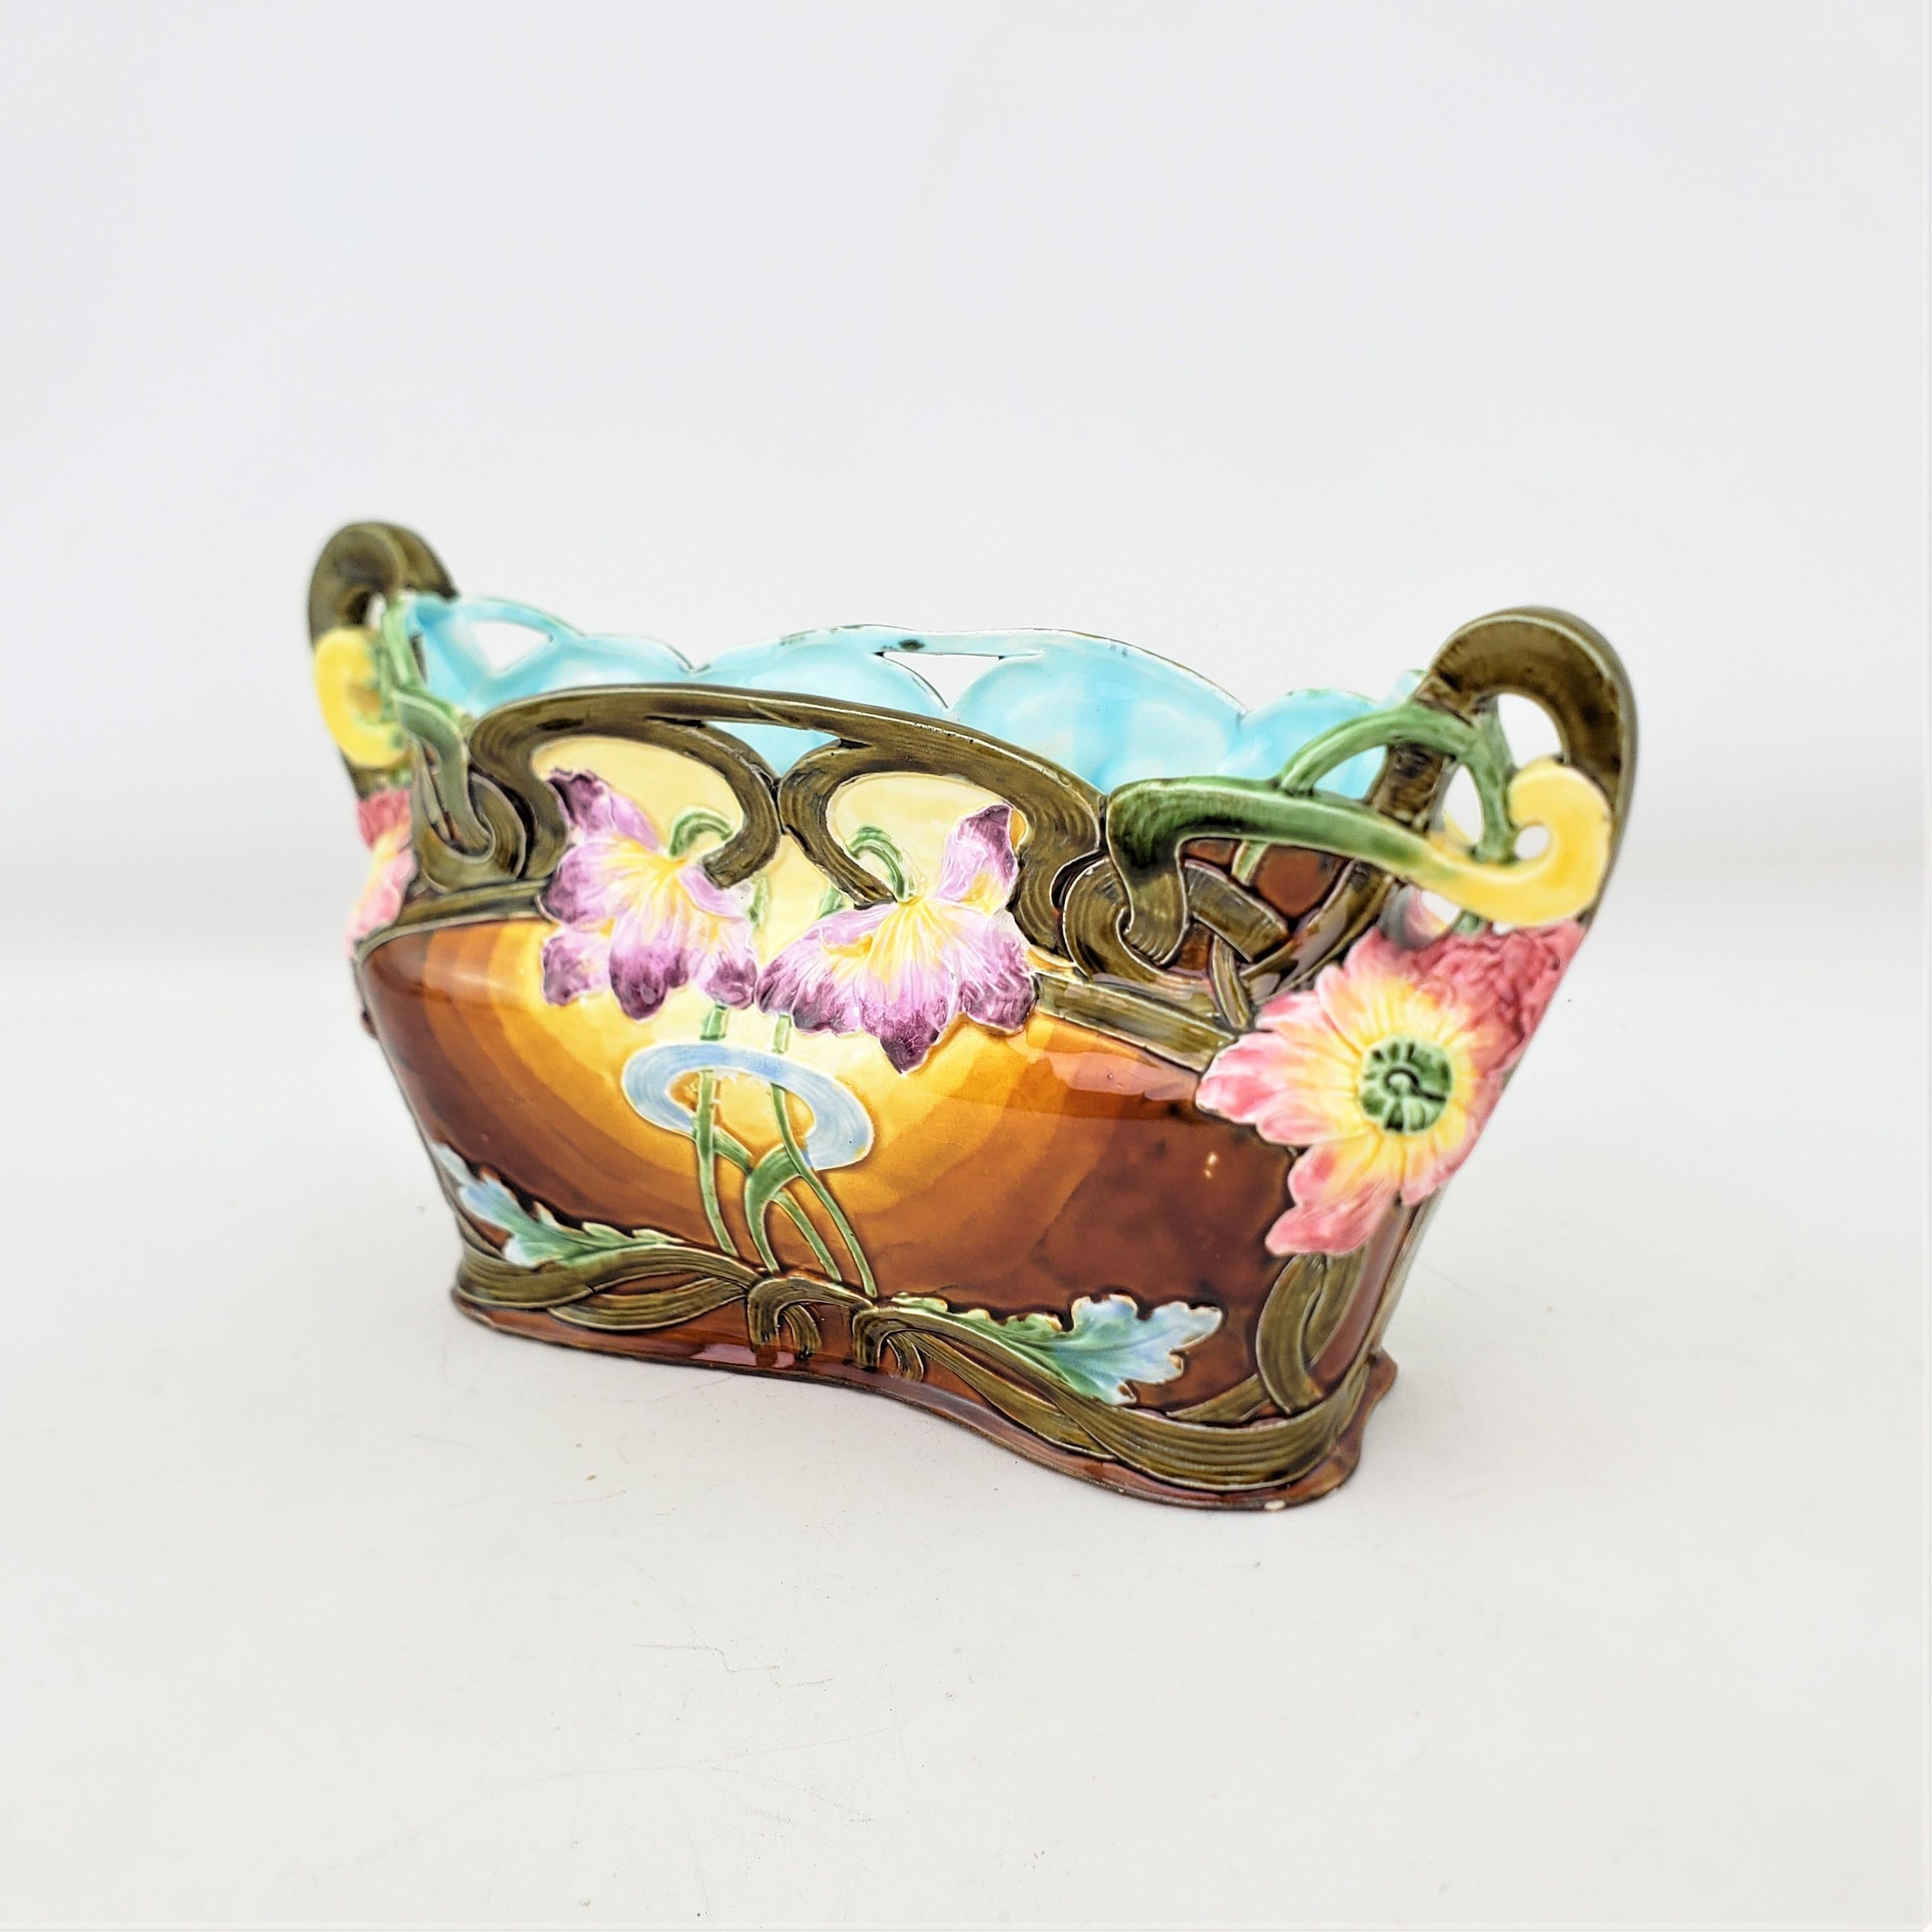 Antique English Majolica Planter or Jardiniere with Floral Decoration In Good Condition For Sale In Hamilton, Ontario